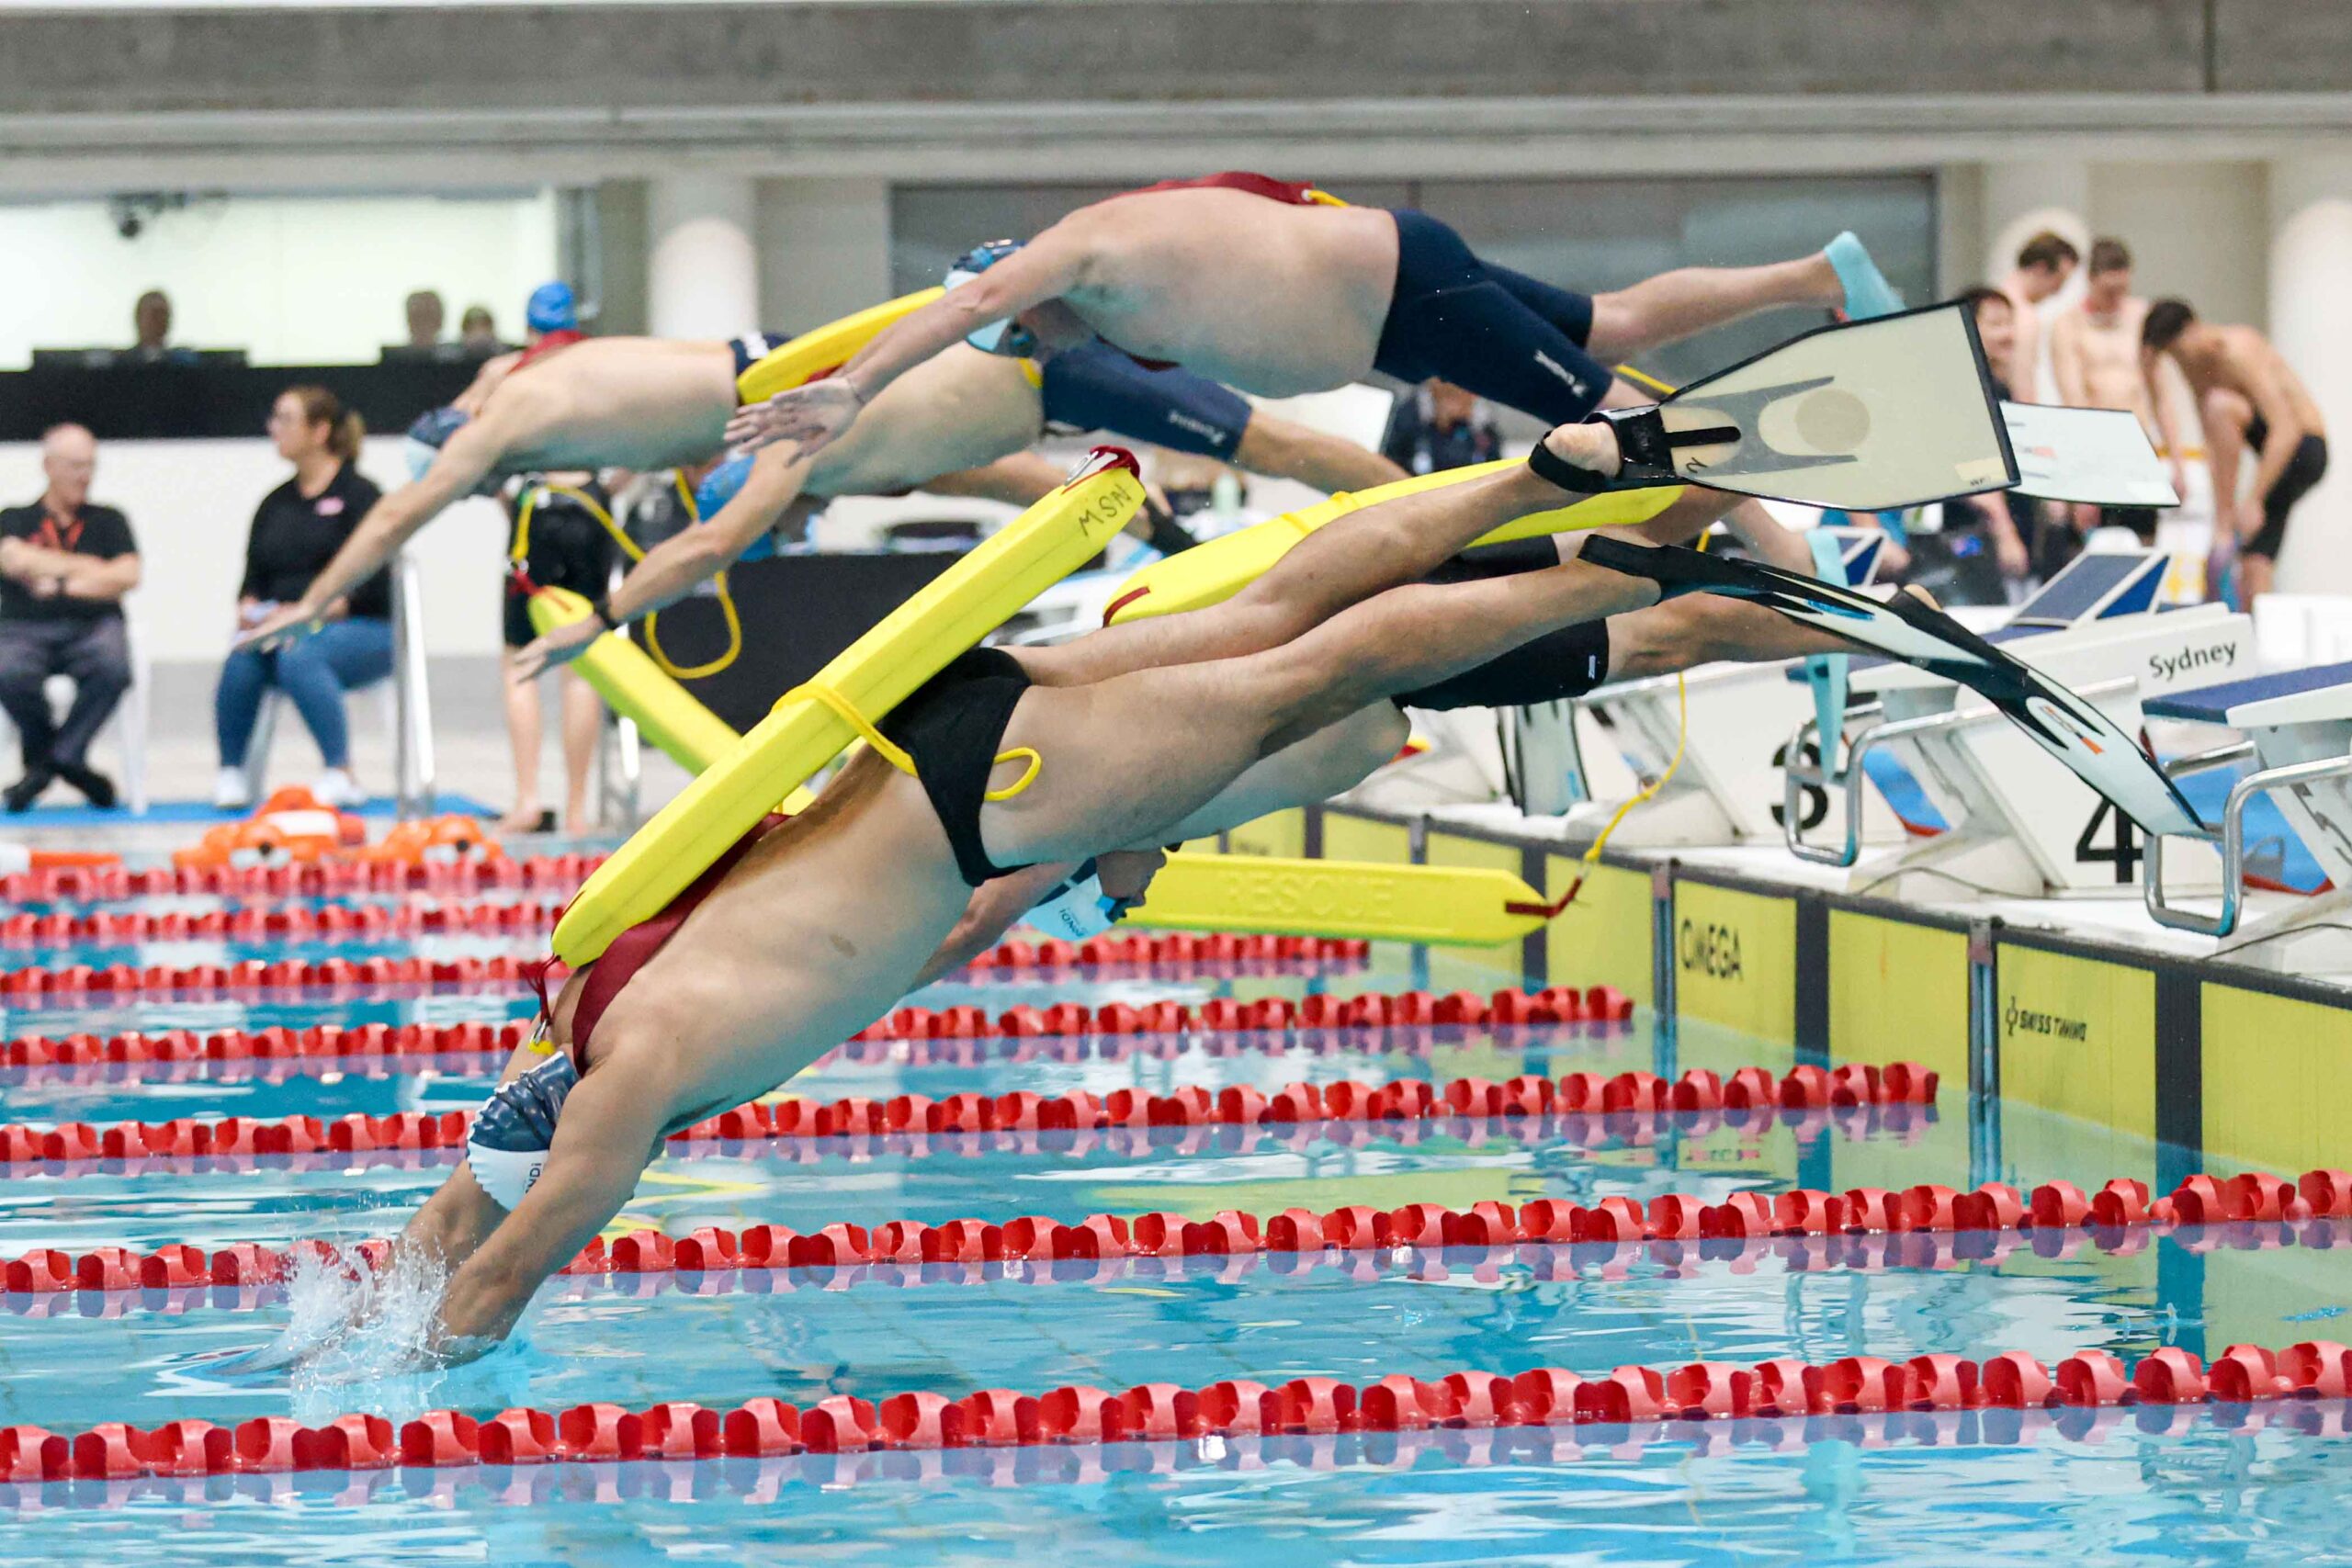 Records Tumble at NSW Pool Championships